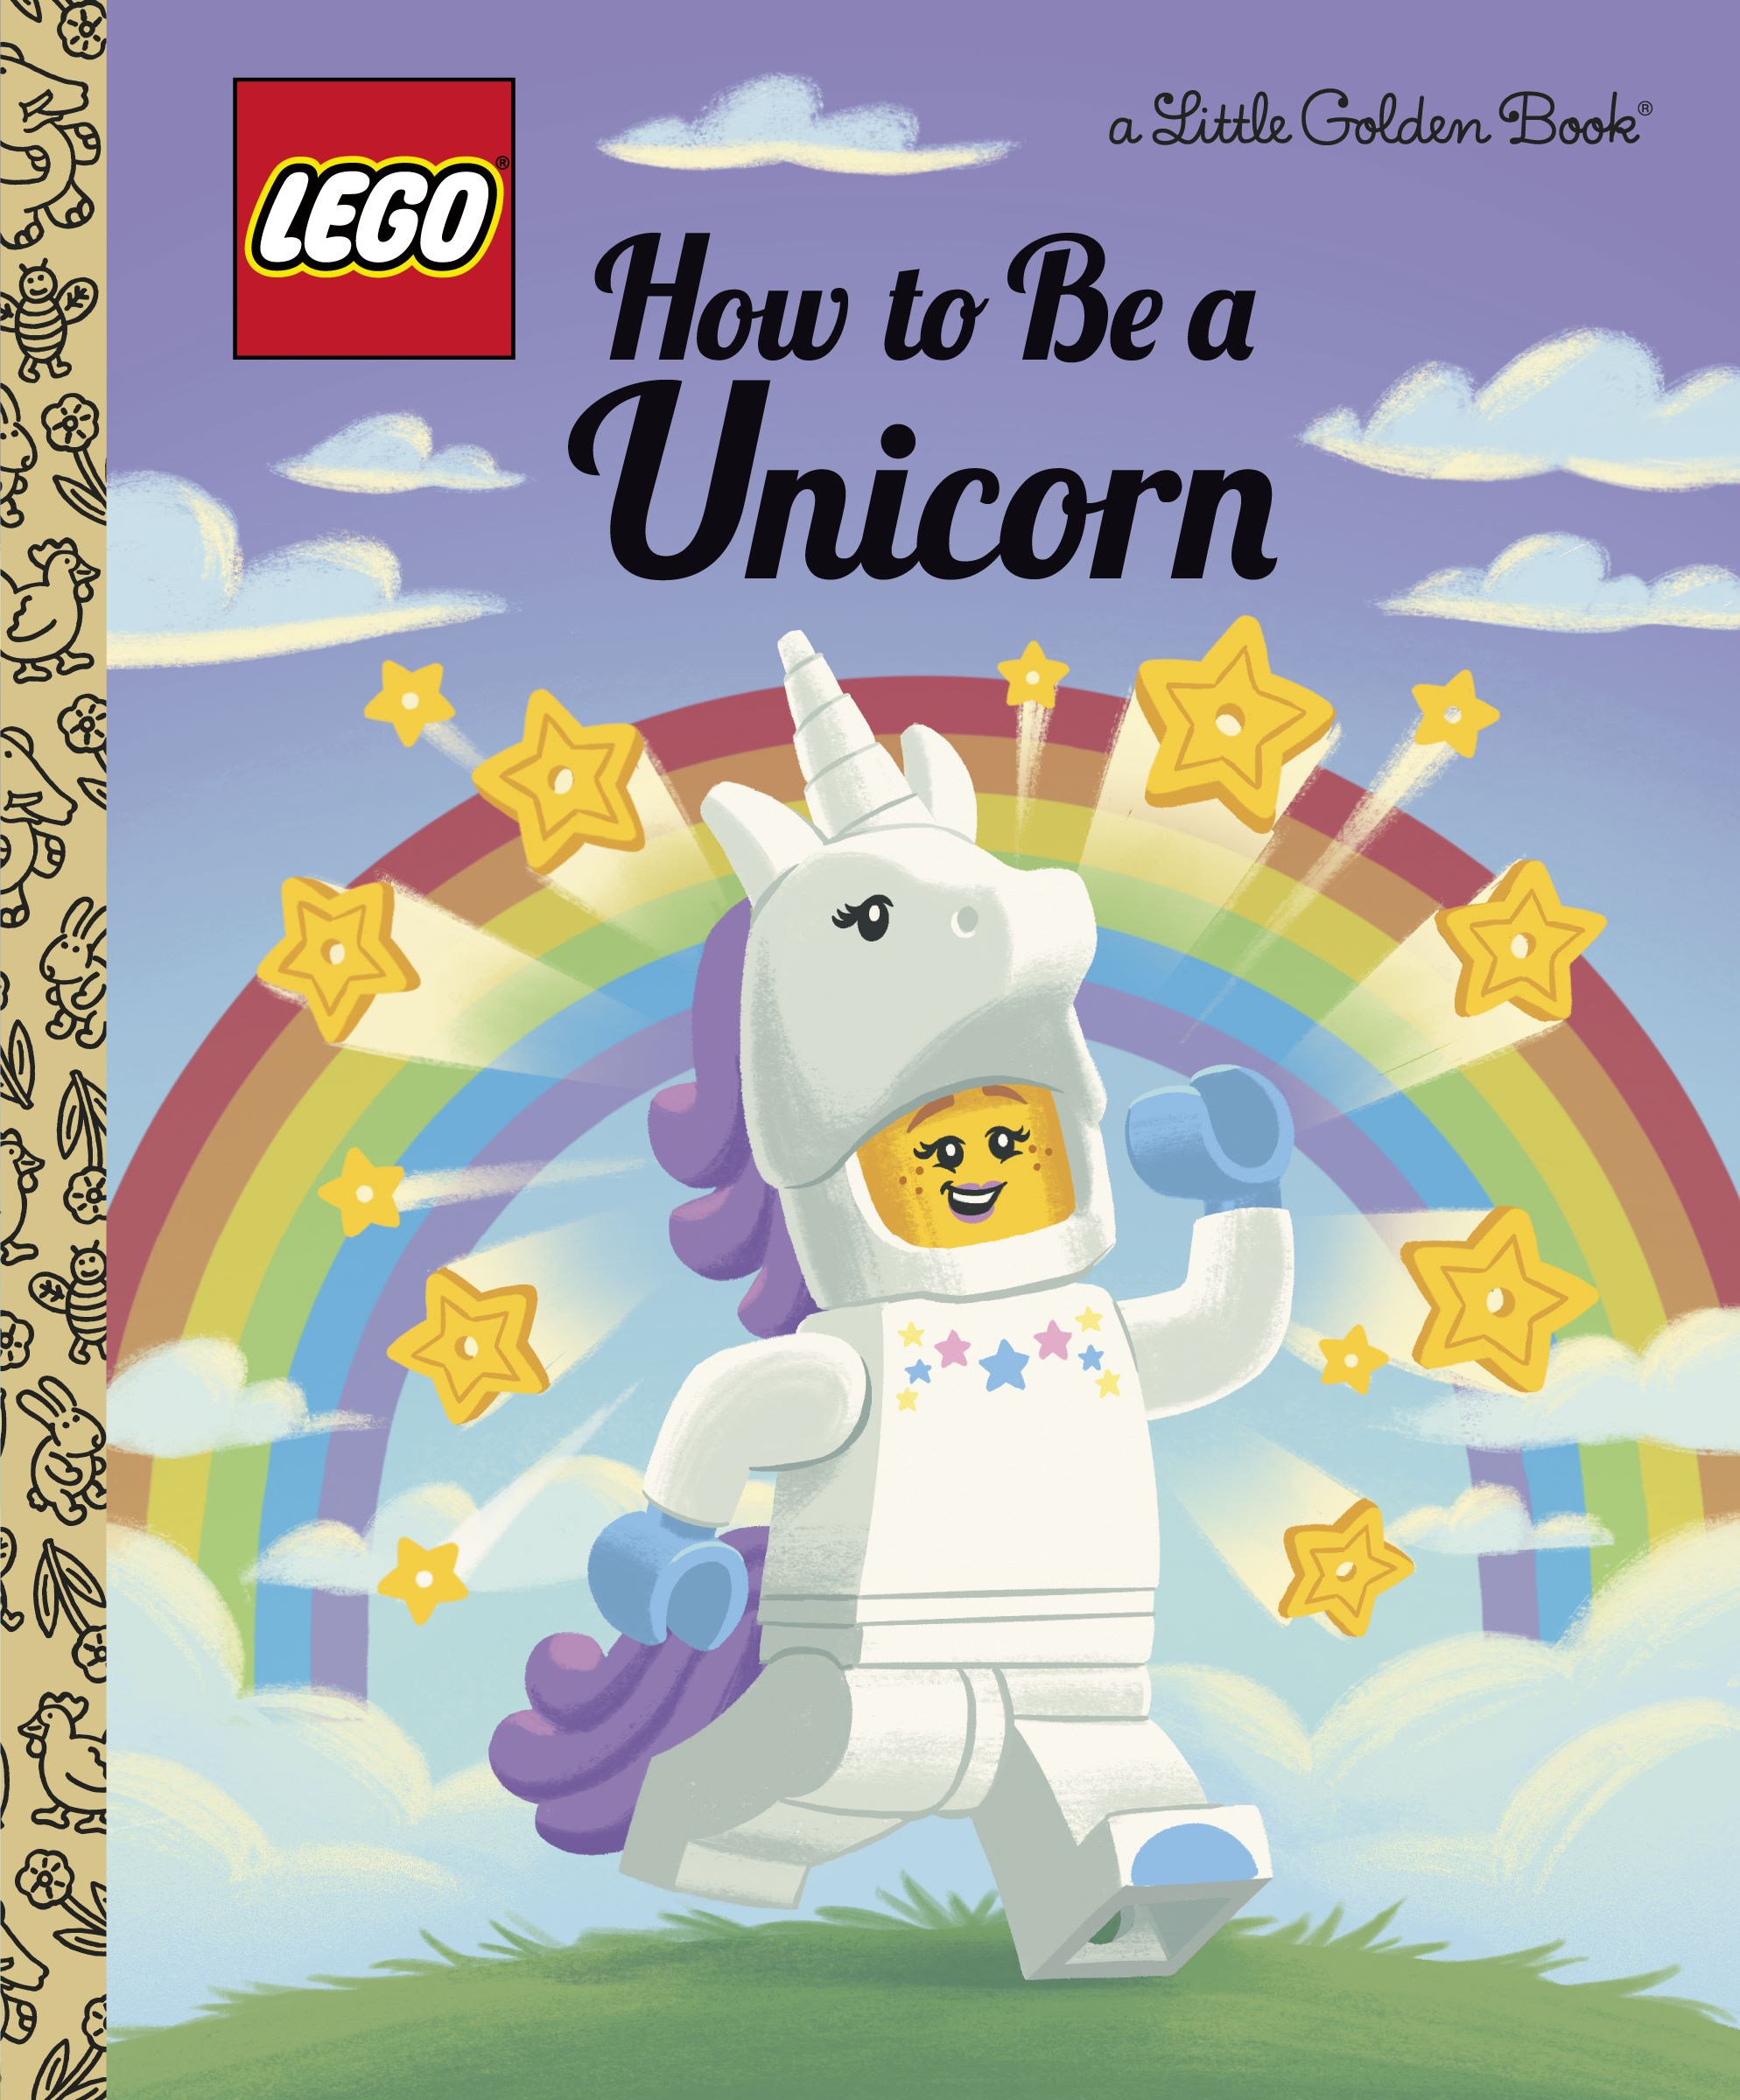 Little Golden Books How To Be A Unicorn (Lego)